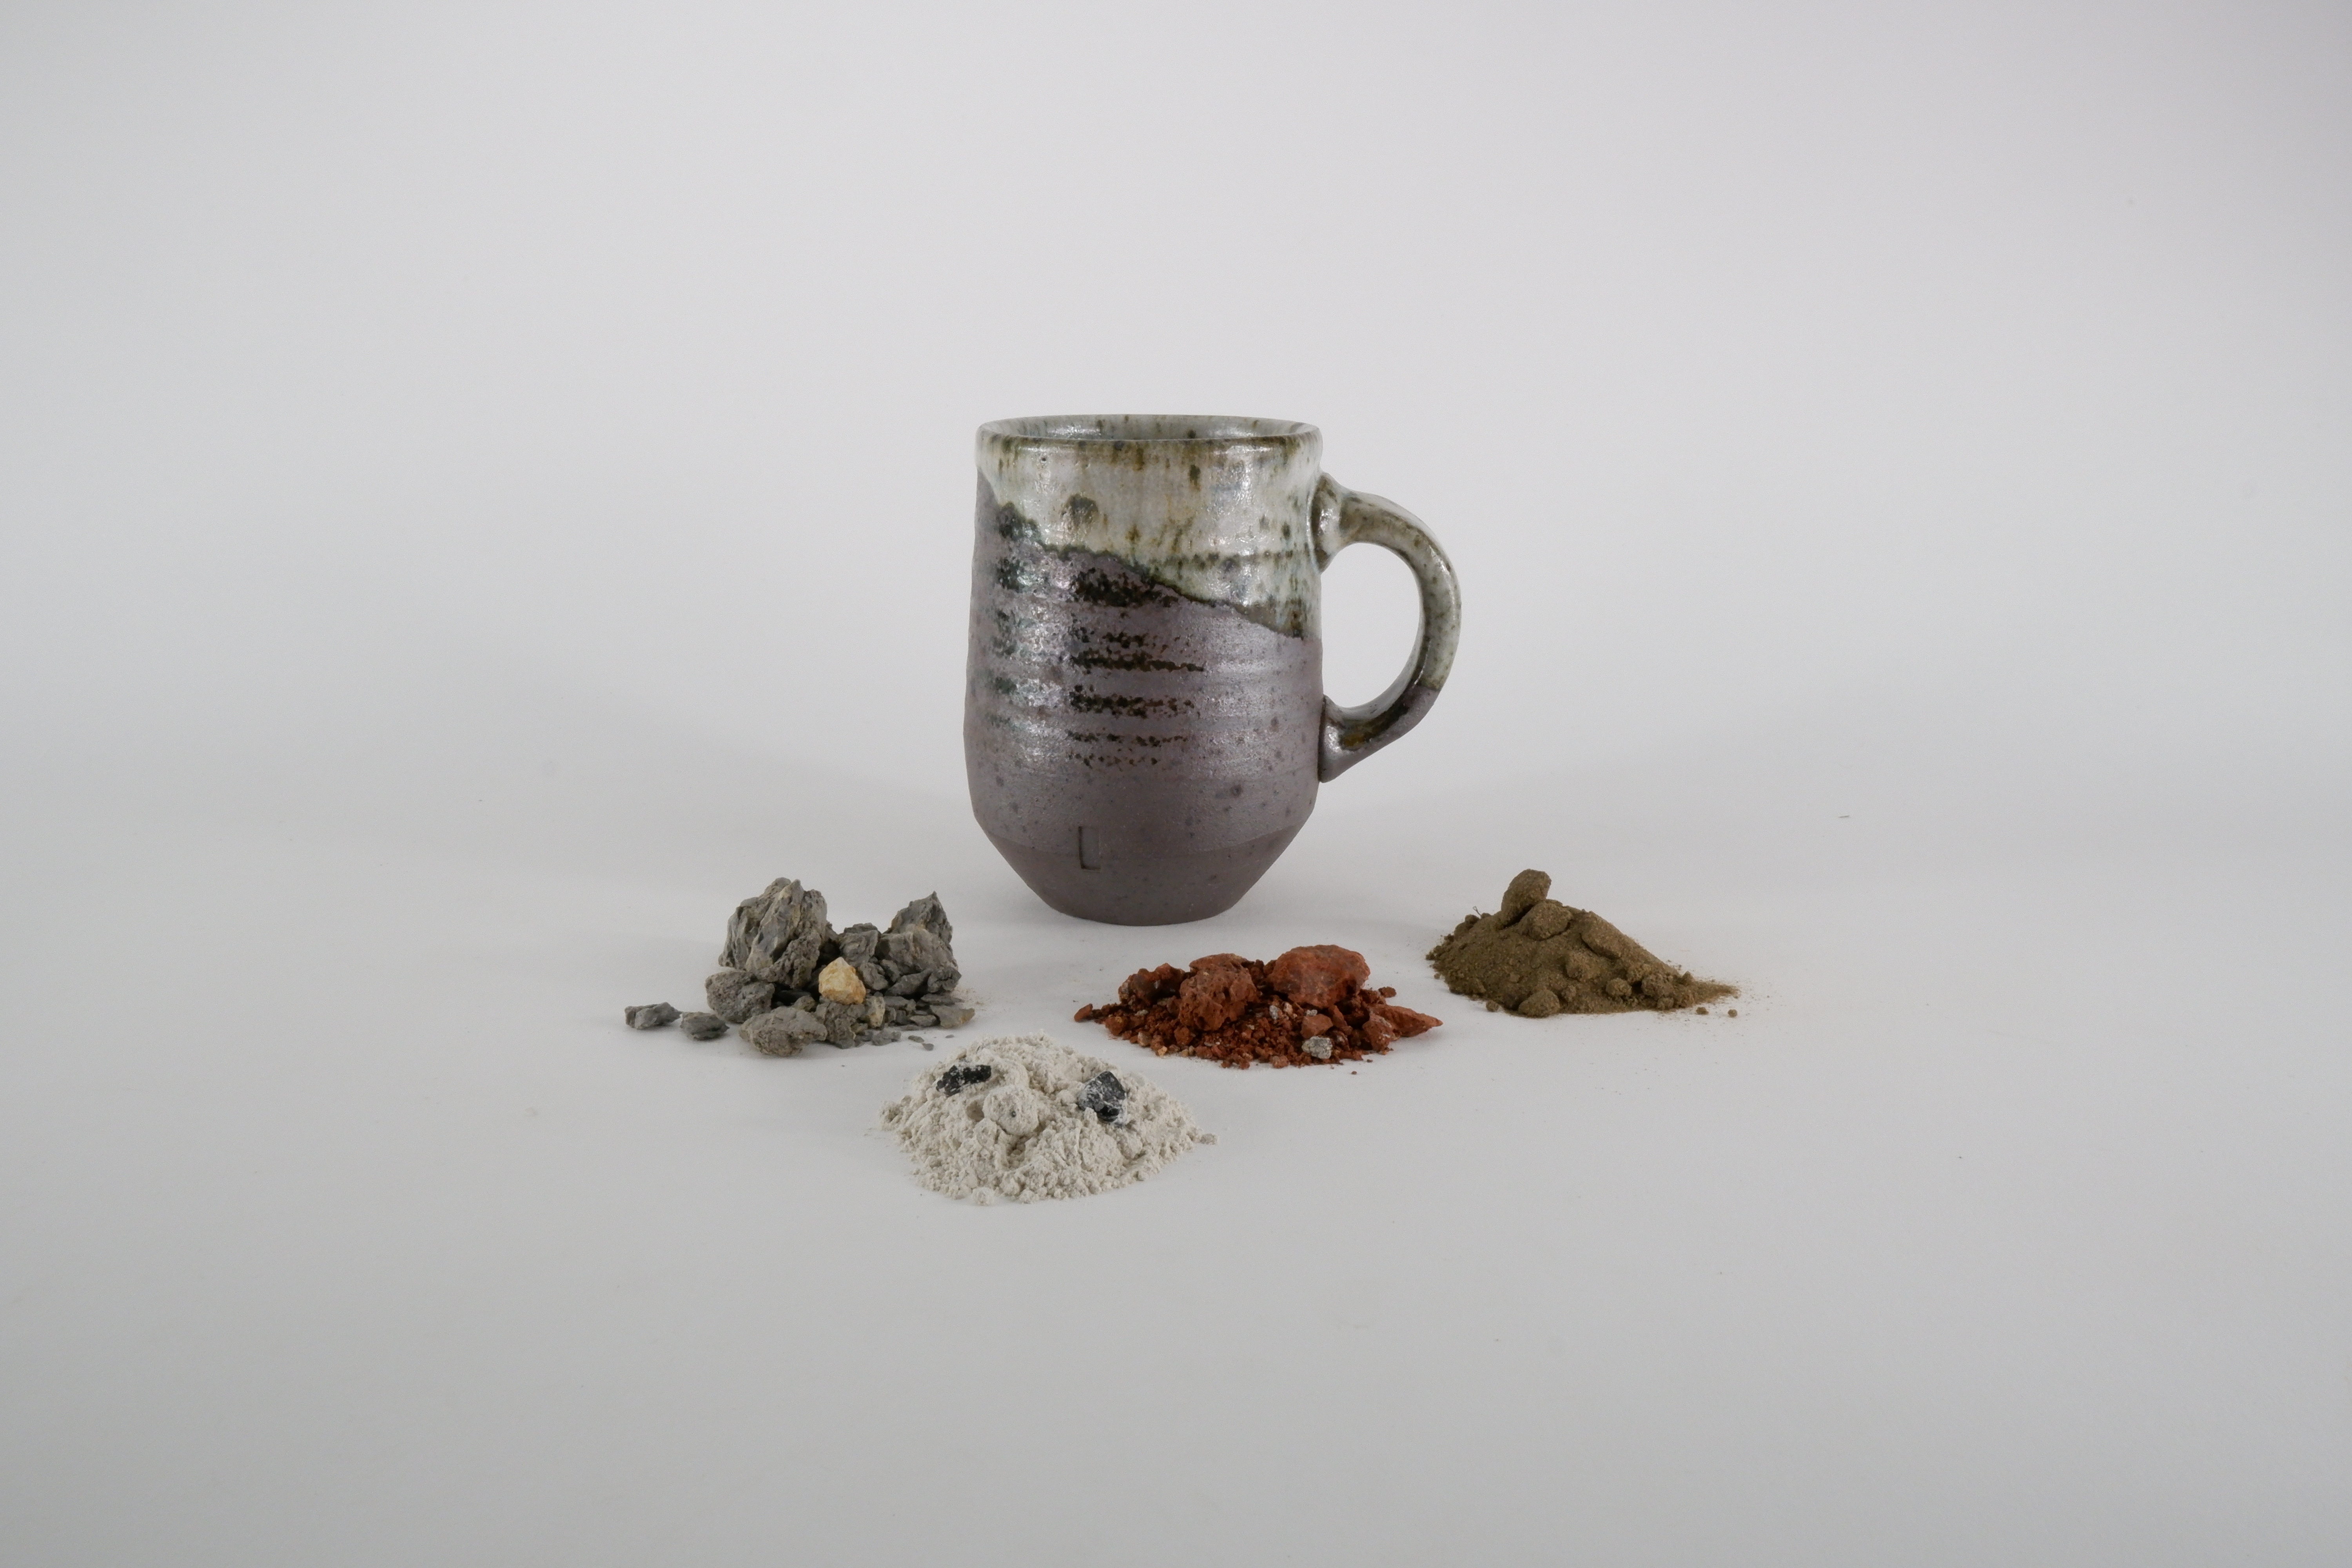 The four local materials it took to make this mug, no industrial materials required.